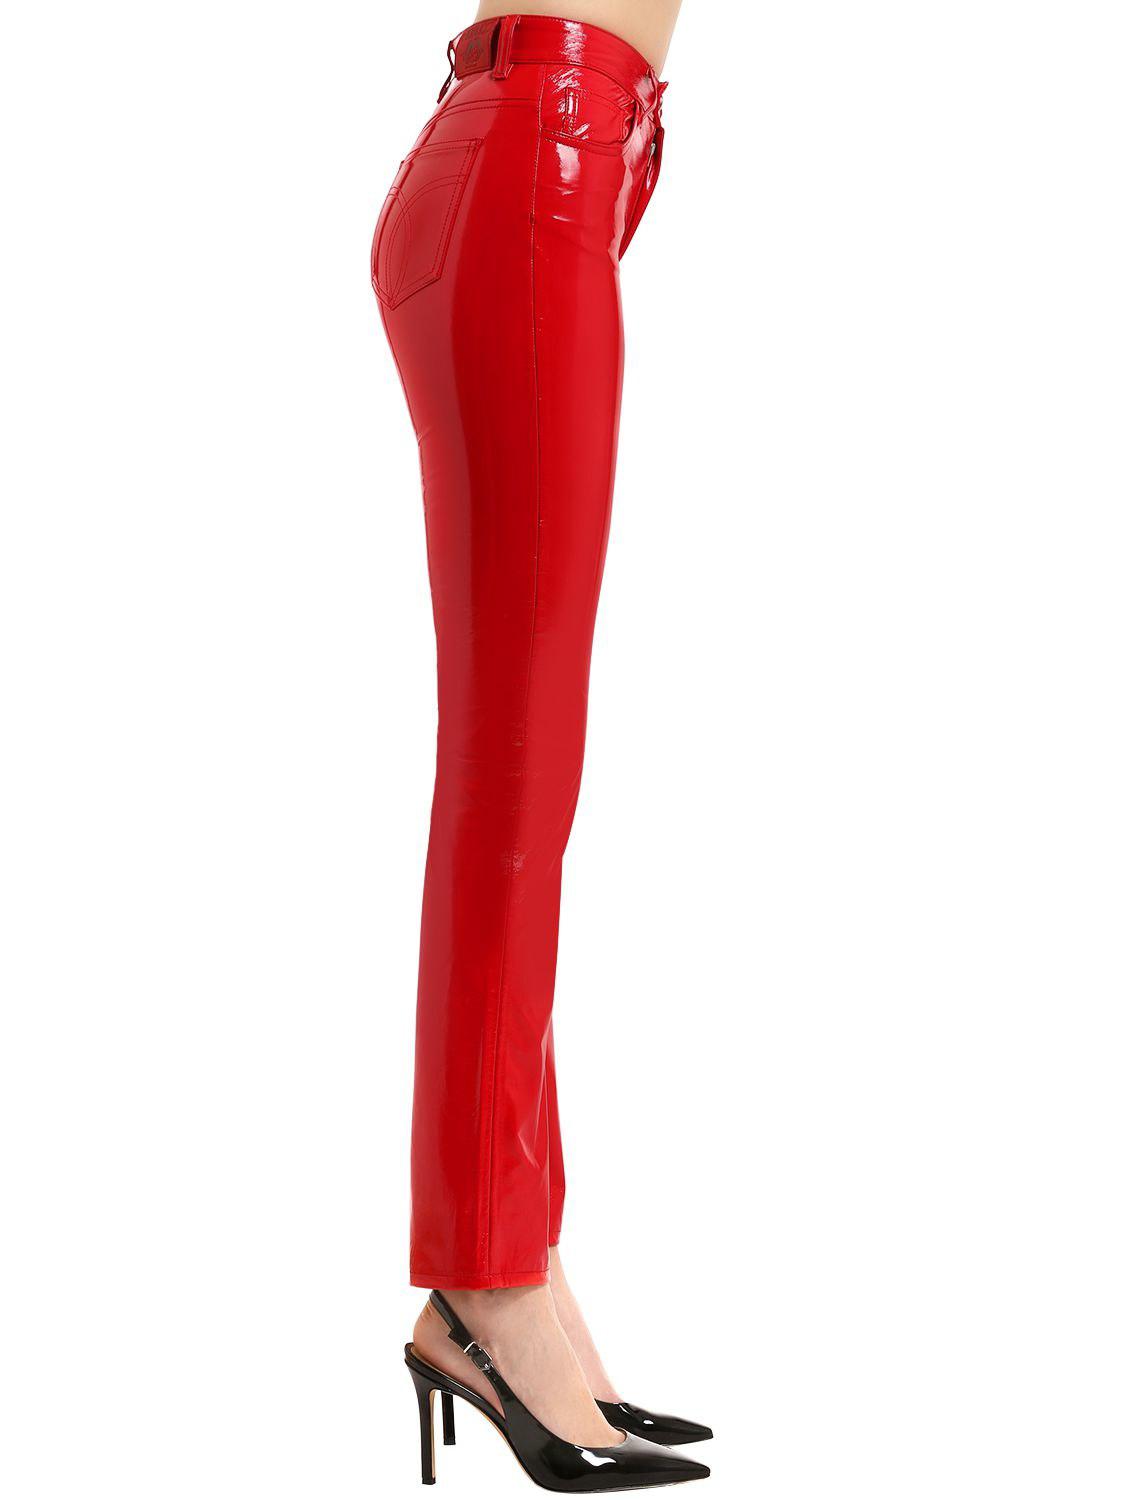 Fiorucci Yves Cigarette Vinyl Pants in Red - Lyst